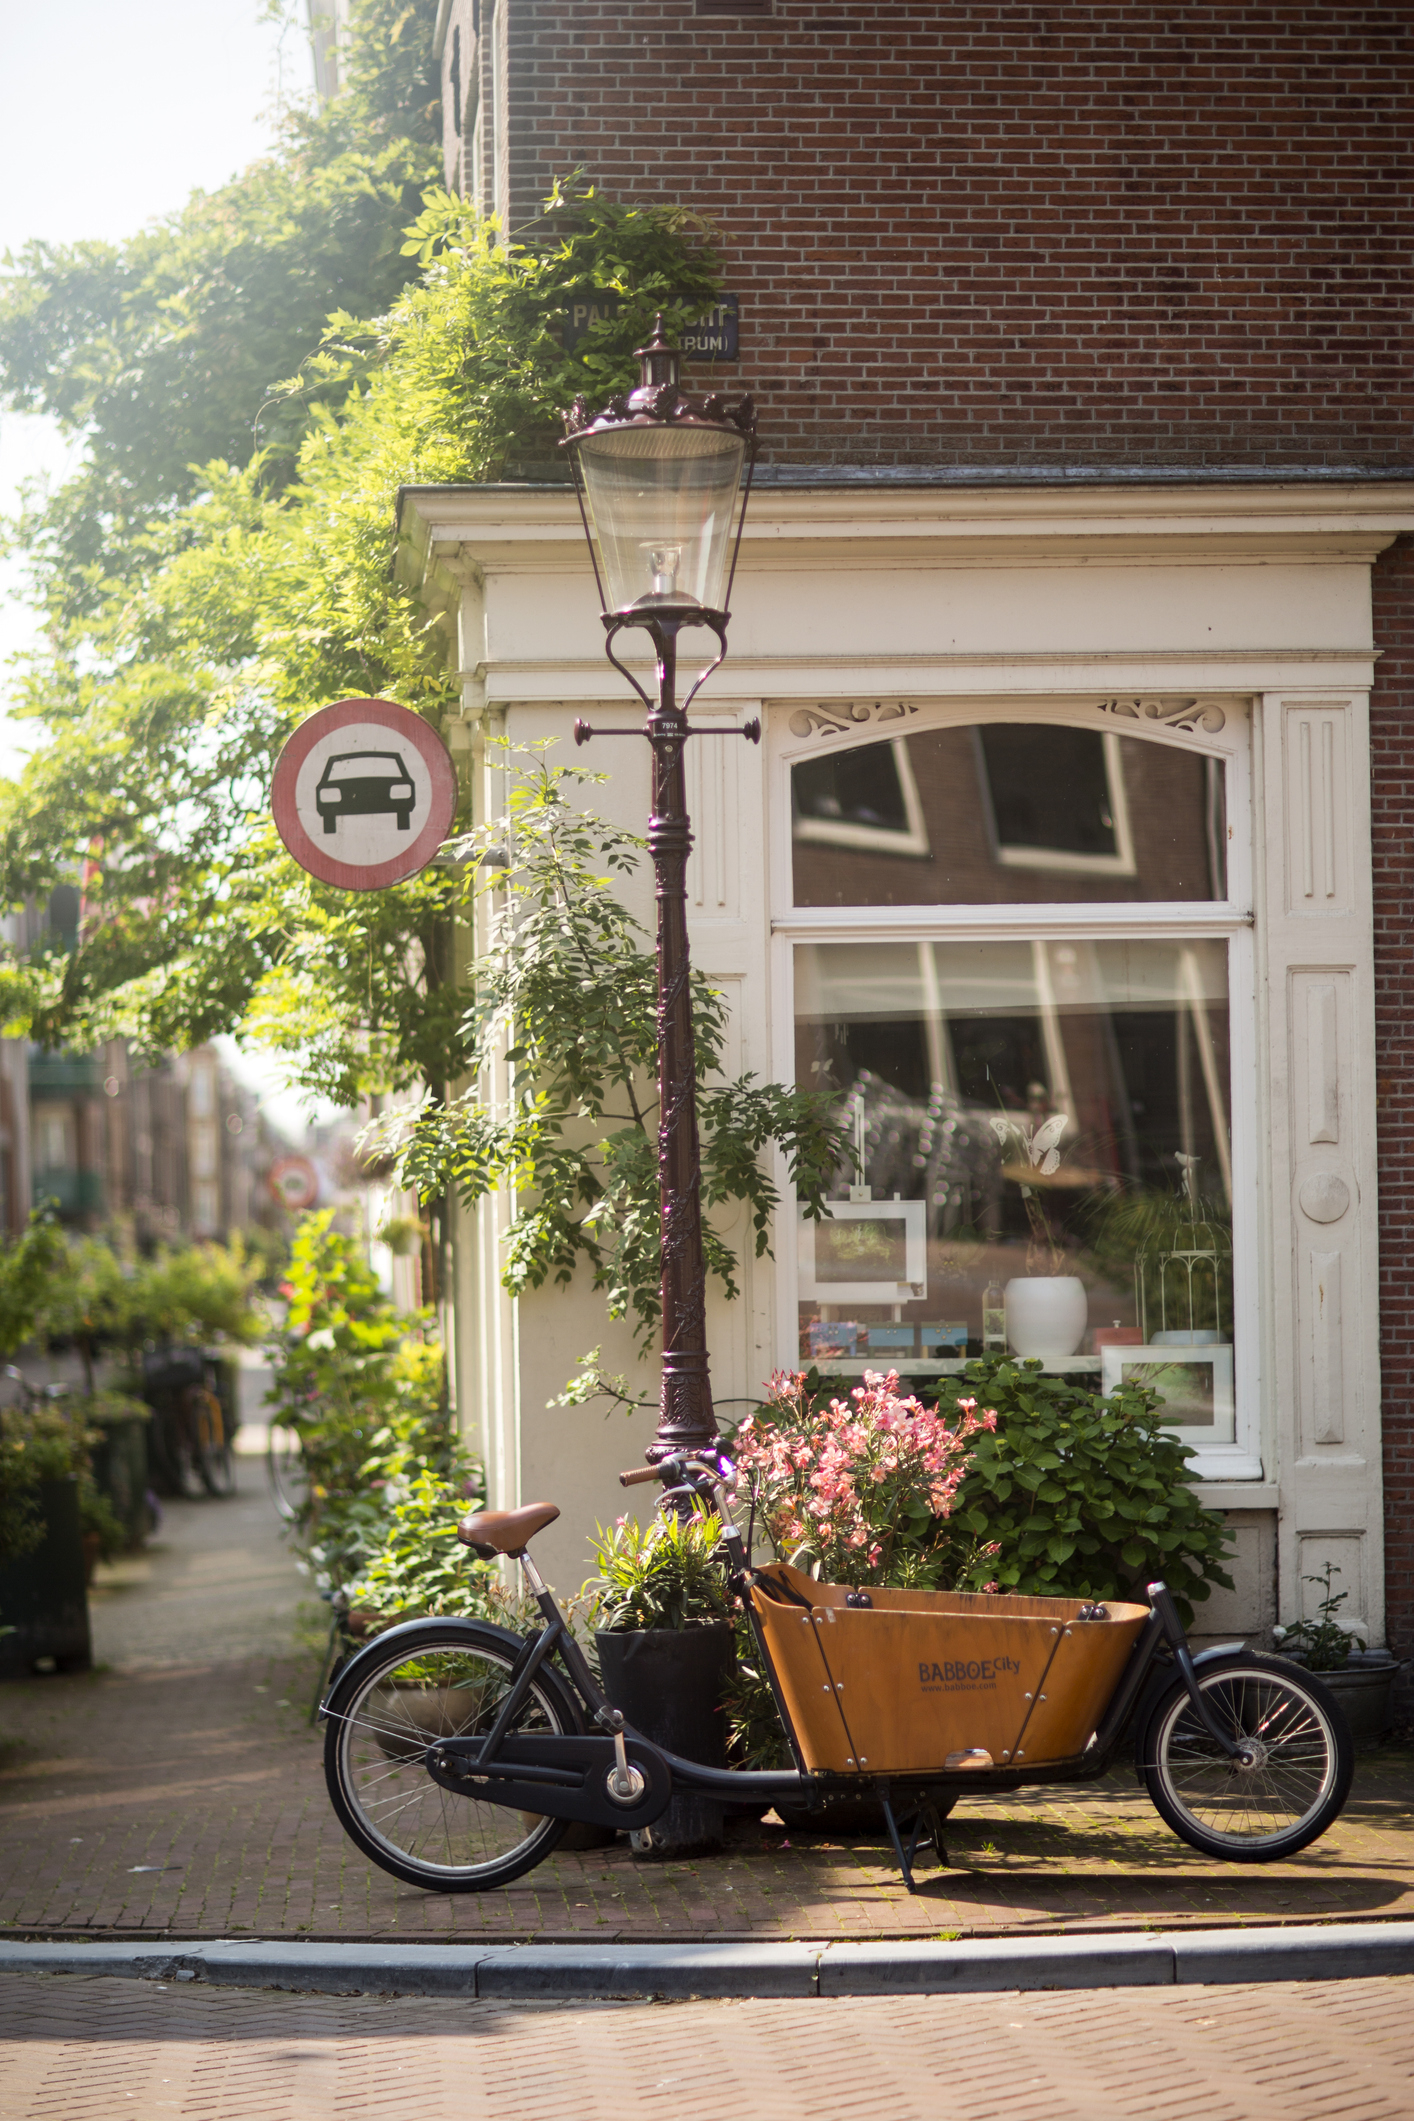 Vintage-style bicycle with a front cargo basket parked beside a lamppost on a sunny street